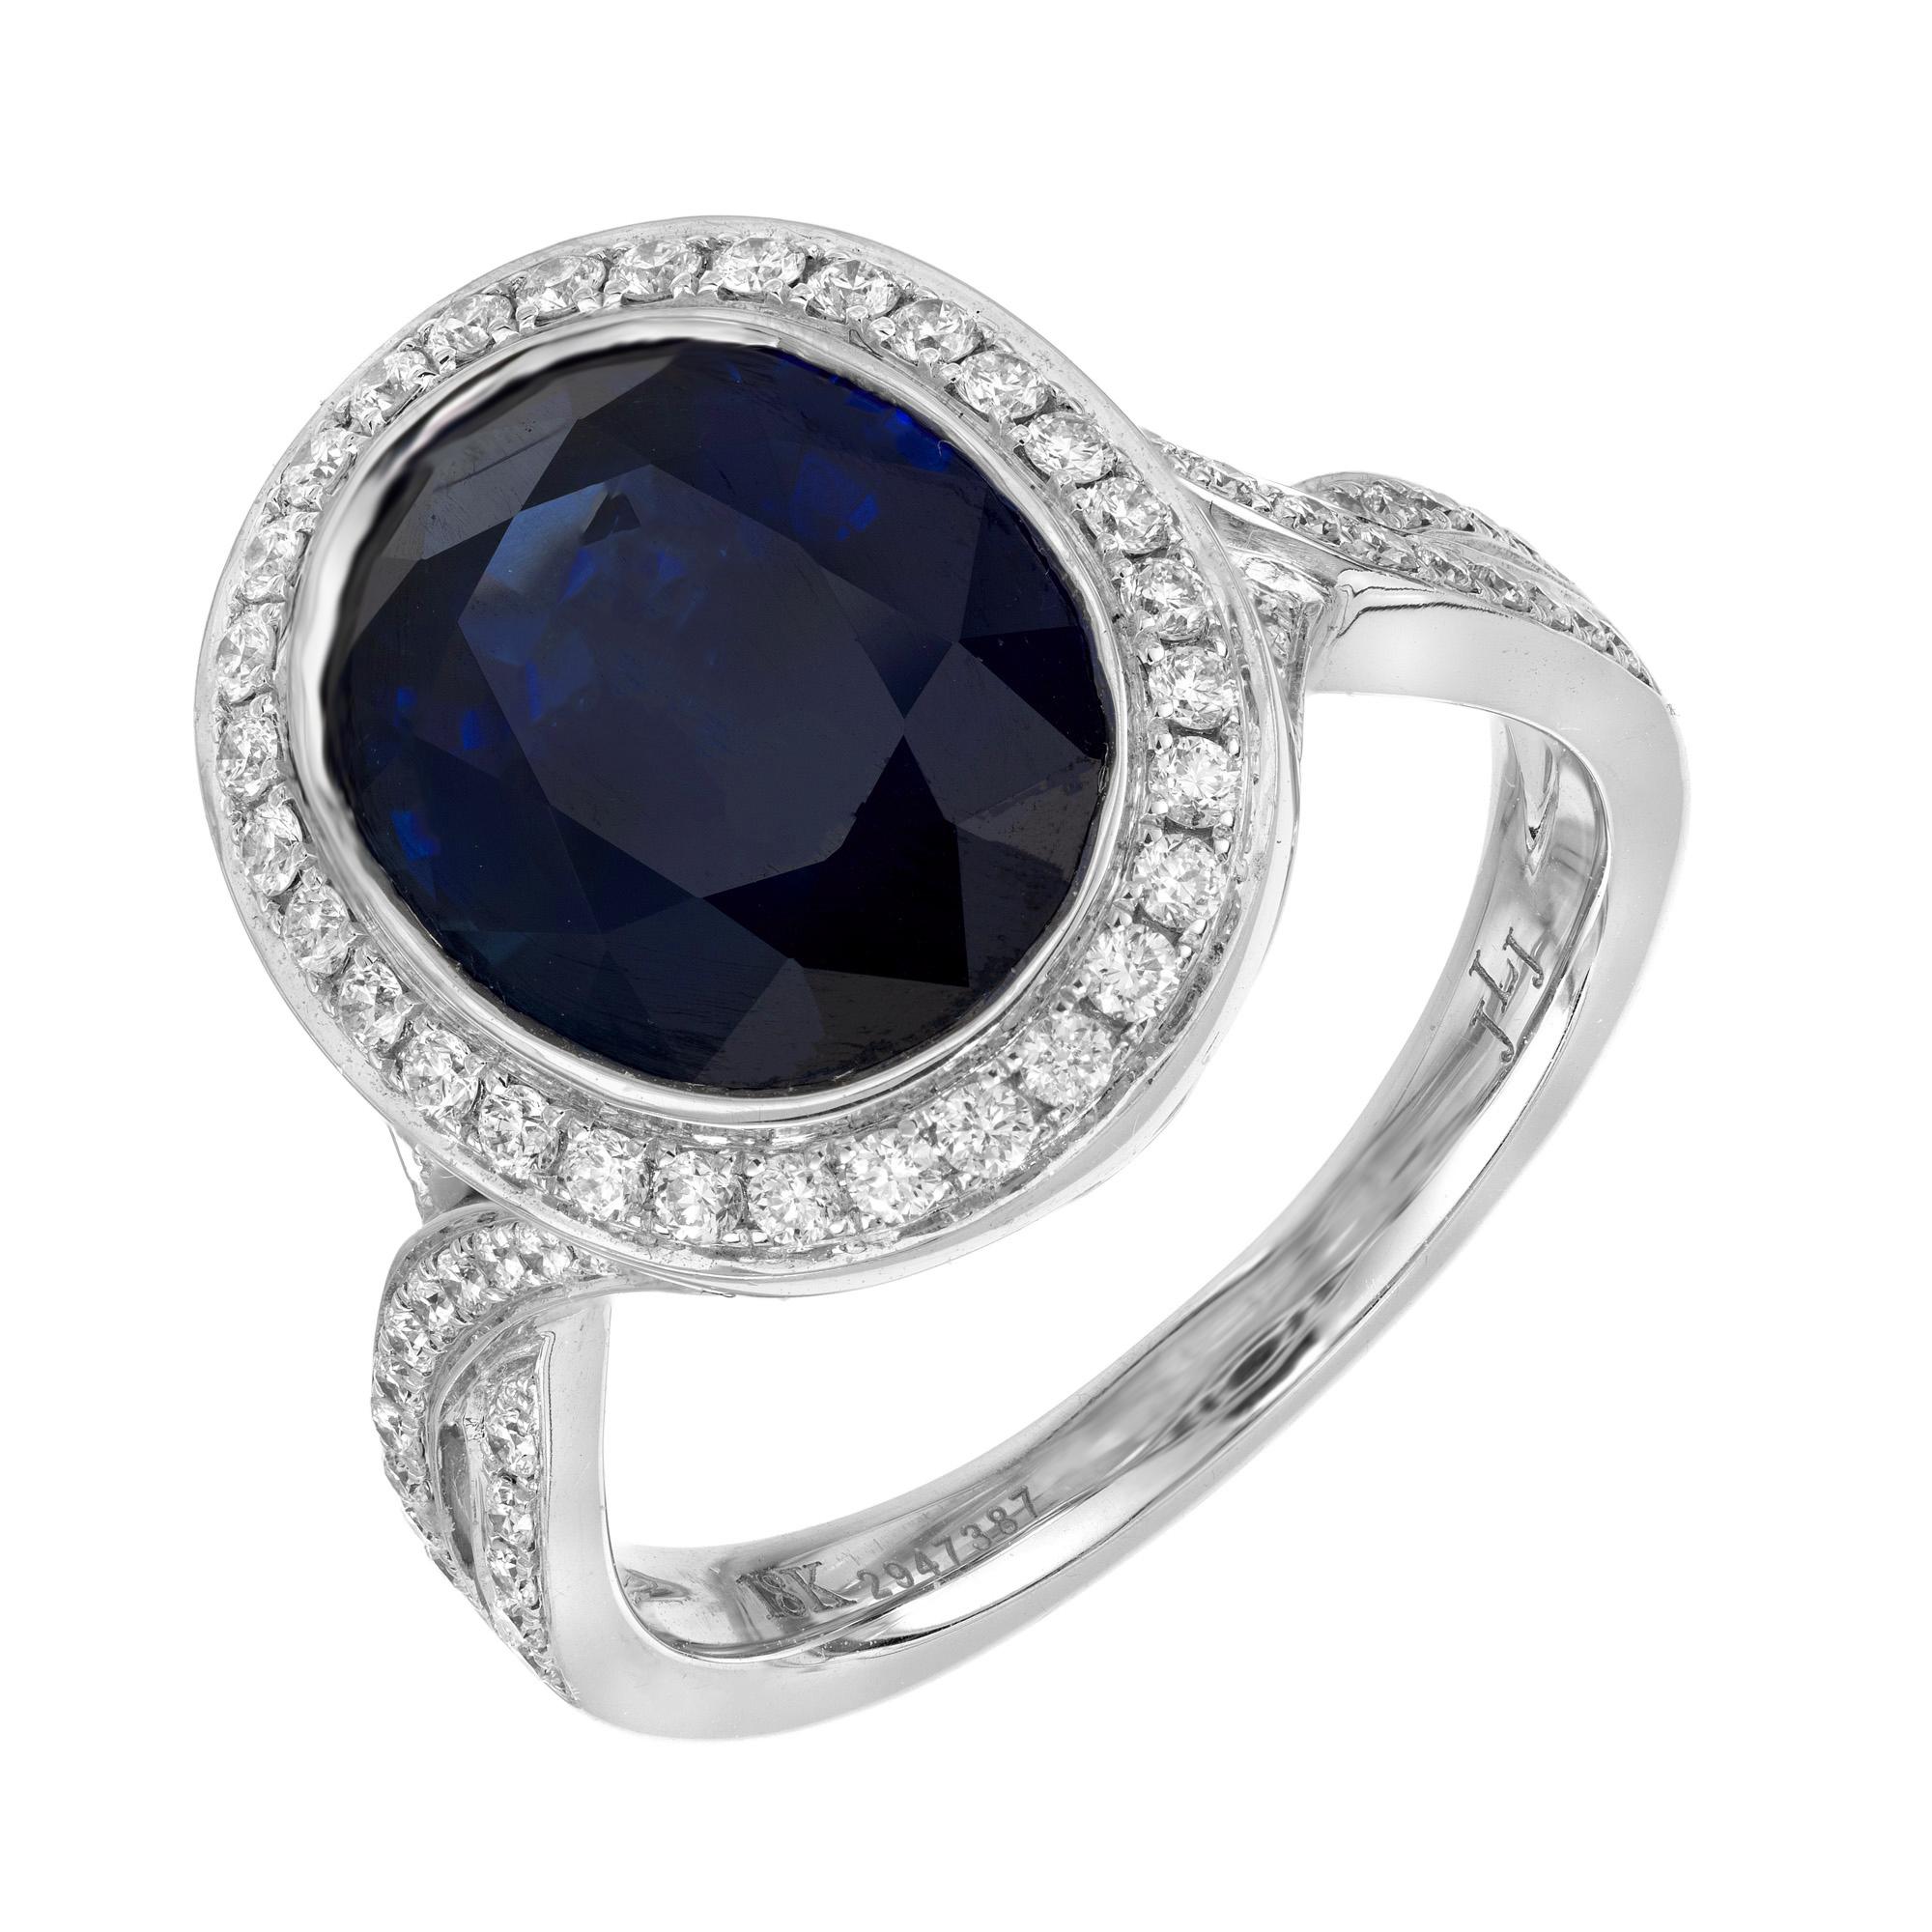 Stunning deep blue natural oval sapphire and diamond engagement ring. At the center of this setting is a rich deep blue oval sapphire mounted and bezel set in 18k white gold. The sapphire is accented by a halo of round brilliant cut diamonds. The